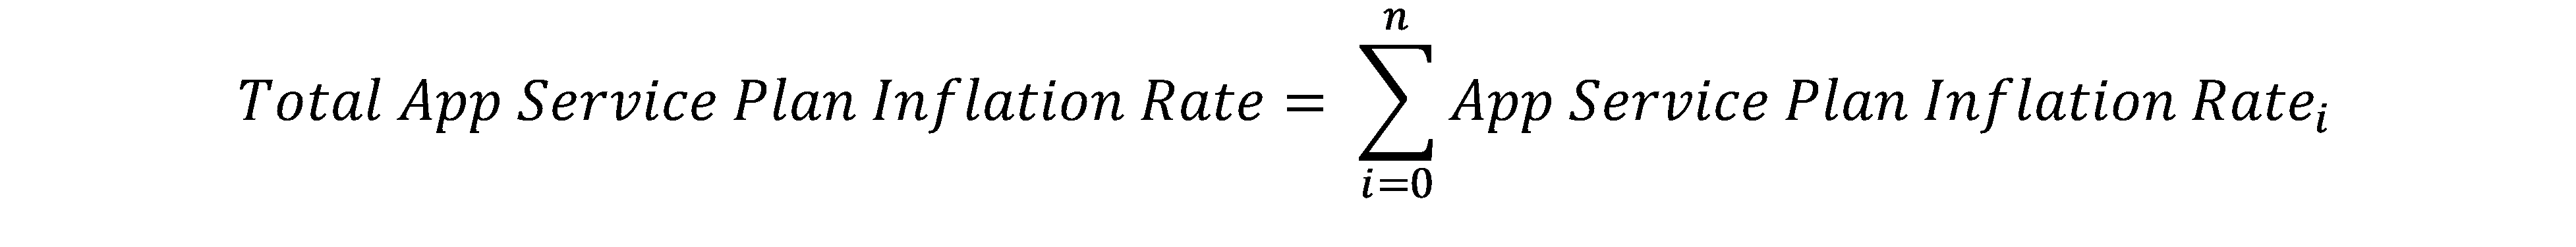 Total inflation rate calculation for multiple App Service plans hosted in a worker pool.